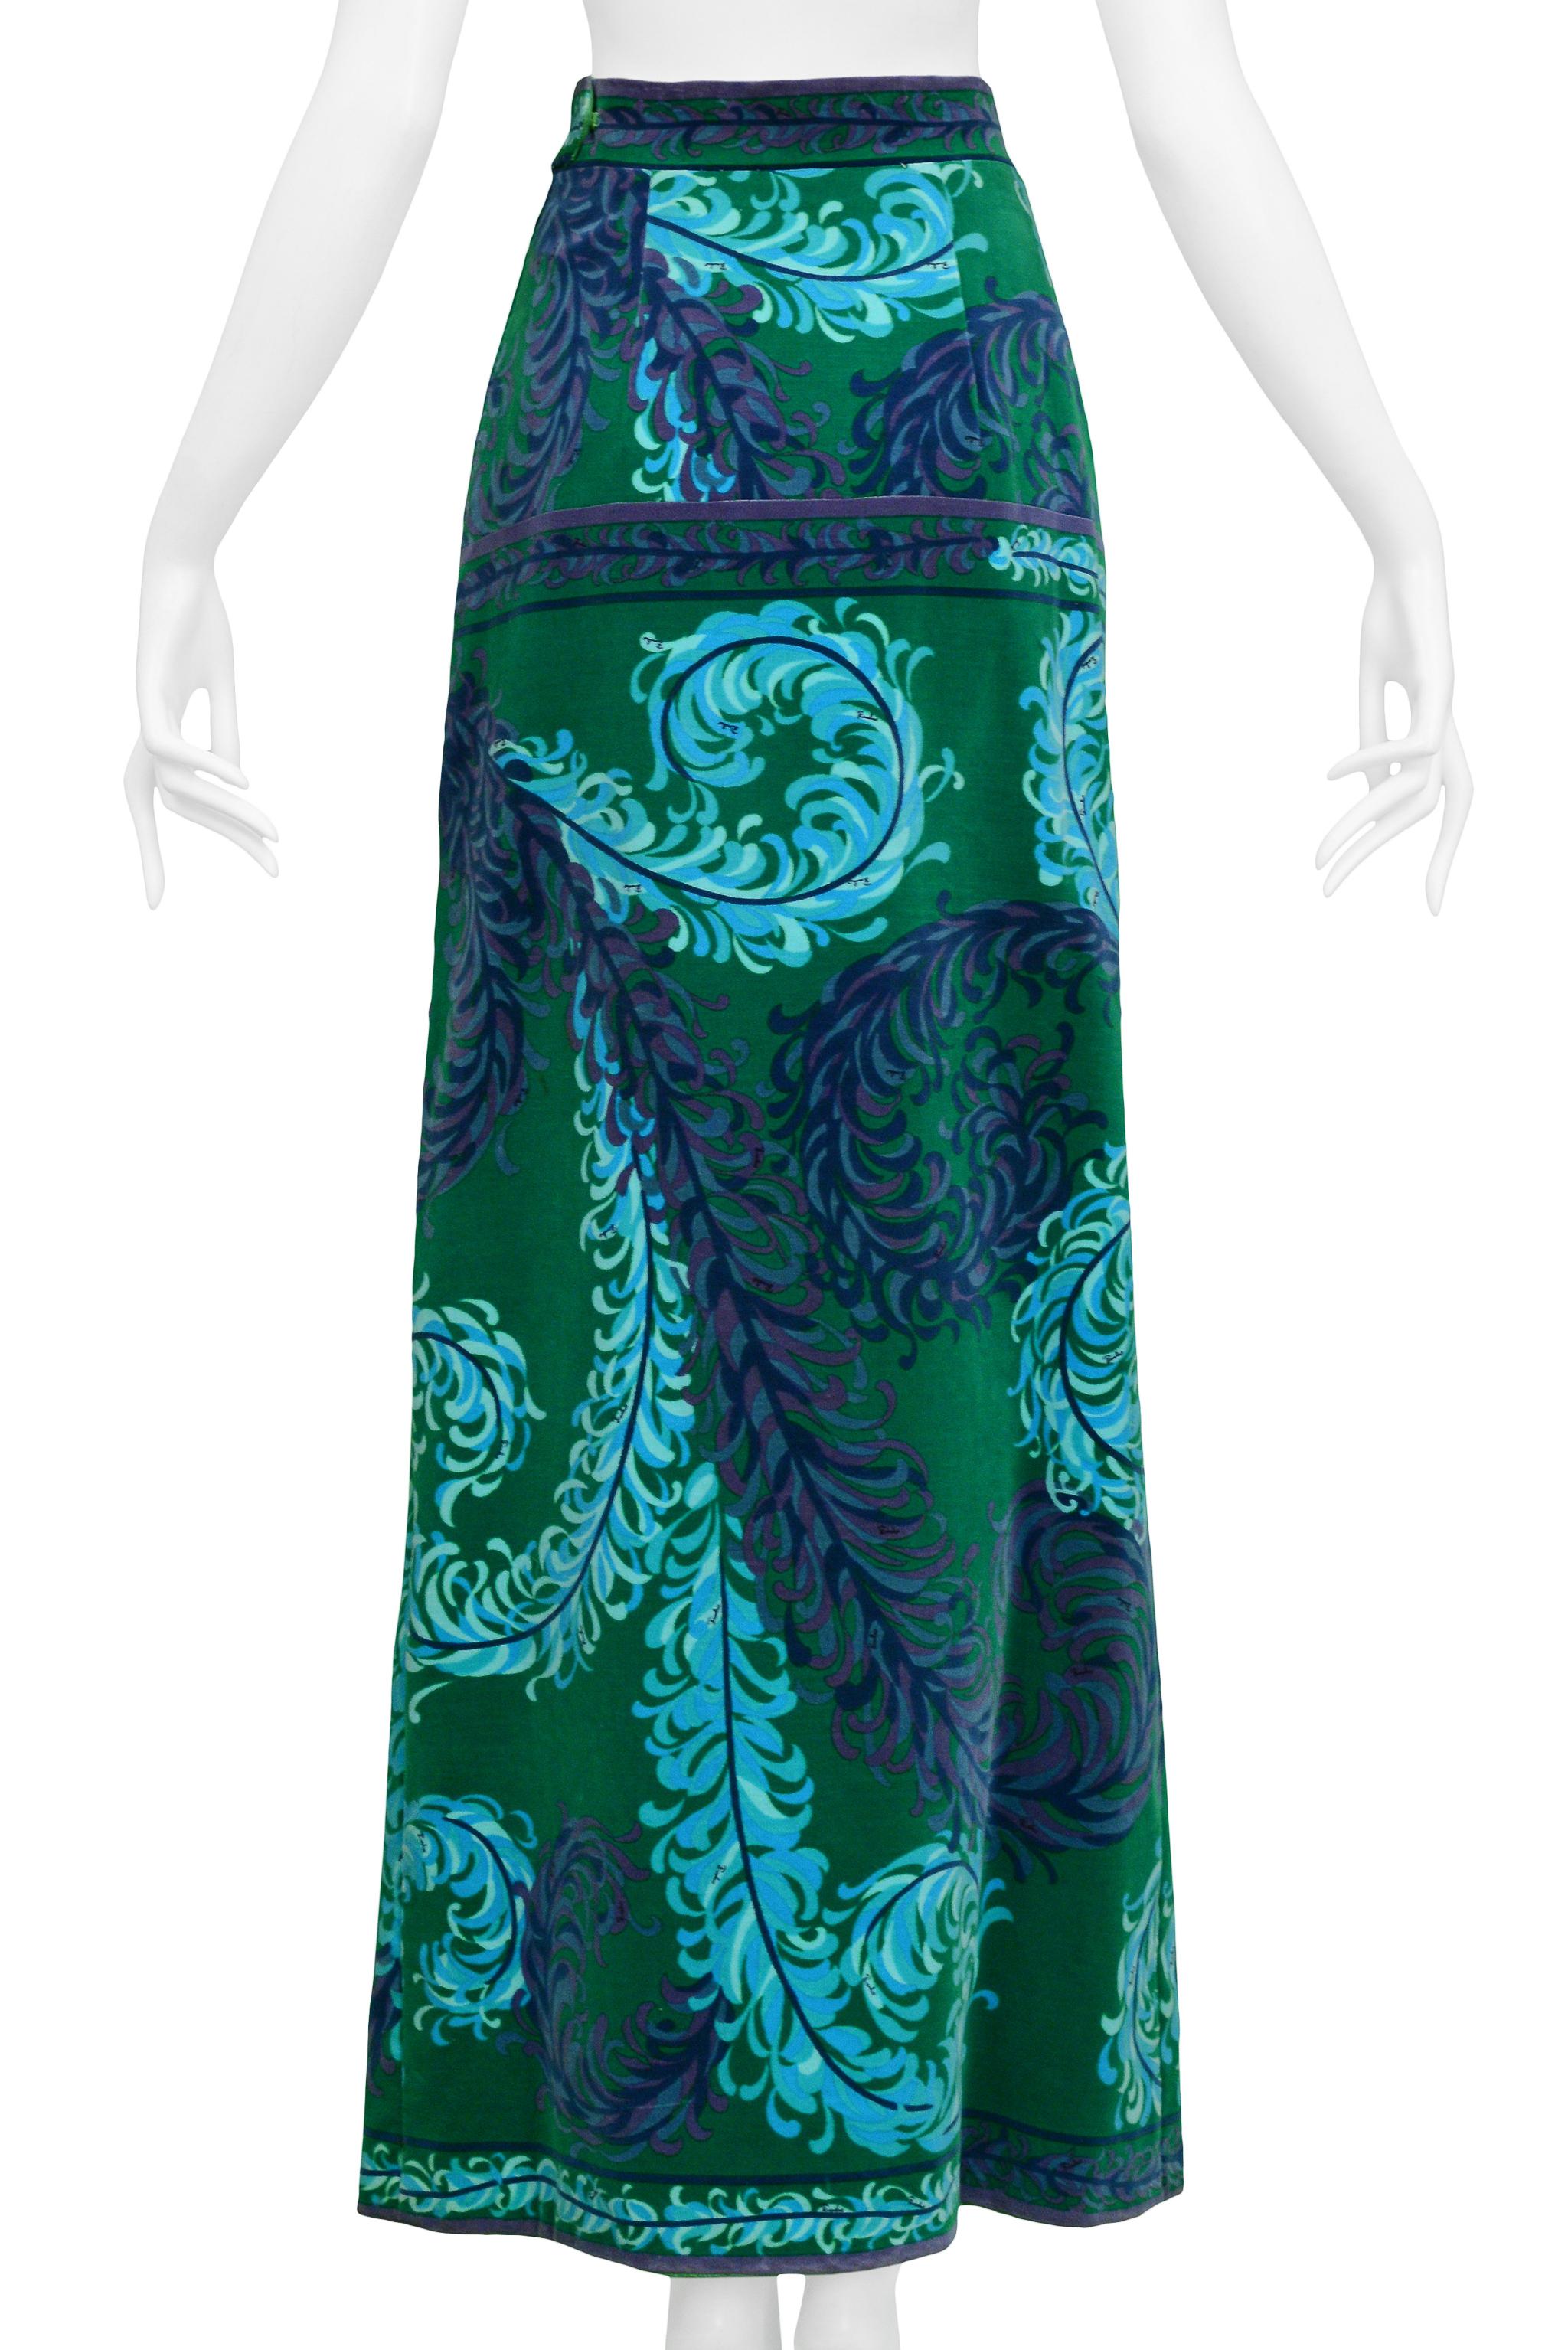 Emilio Pucci Green & Blue Velvet Hostess Maxi Skirt With Feather Print In Good Condition For Sale In Los Angeles, CA